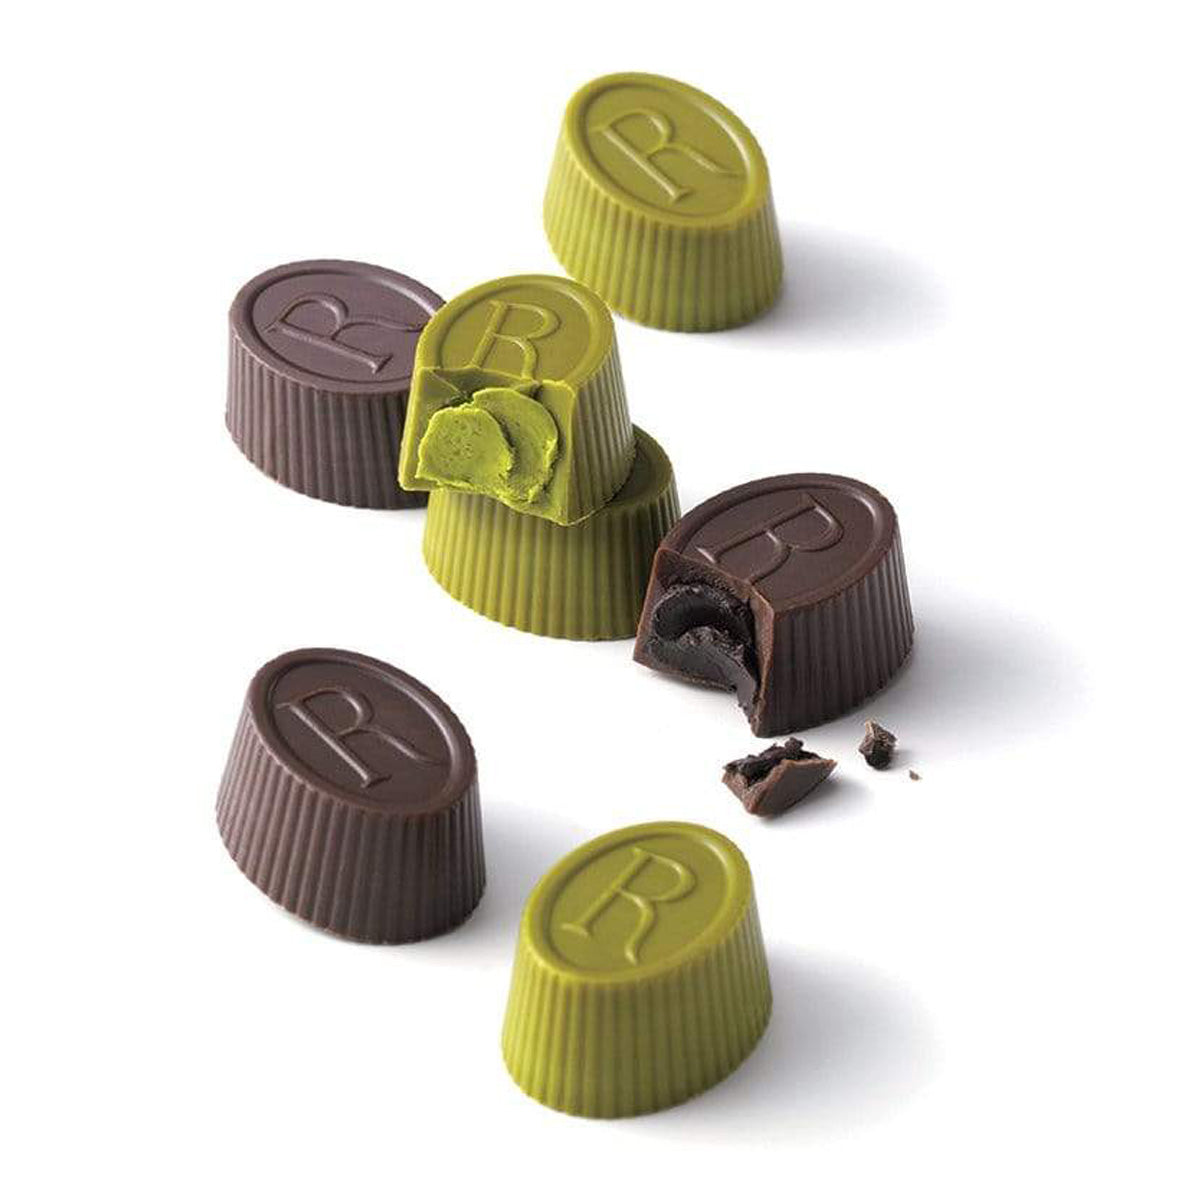 ROYCE' Chocolate - Tea Chocolat "Hojicha & Matcha" - Image shows brown and green chocolate cups engraved with the letter R.